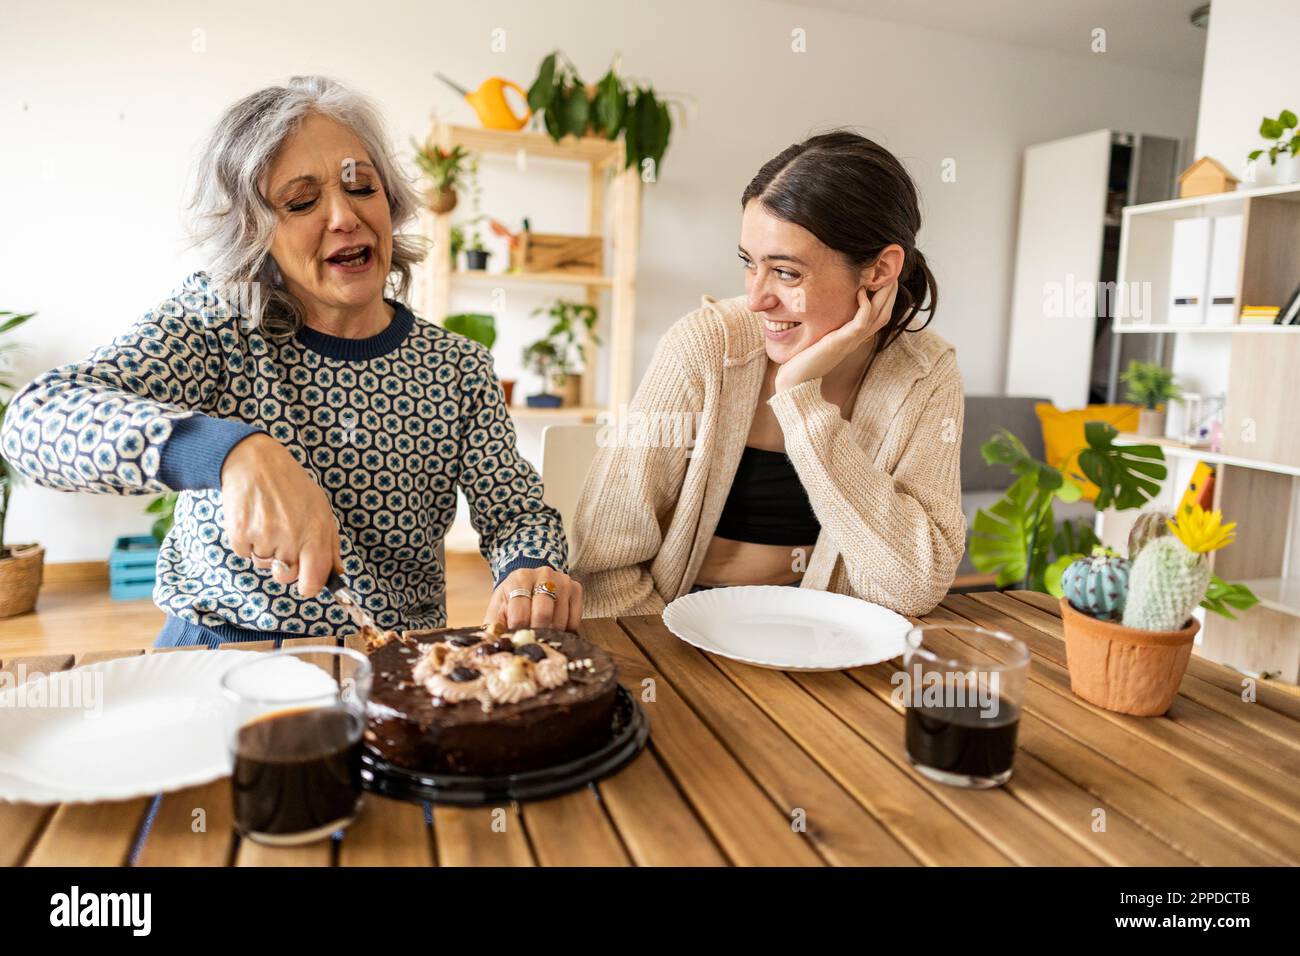 Mother cutting cake with daughter sitting at table Stock Photo